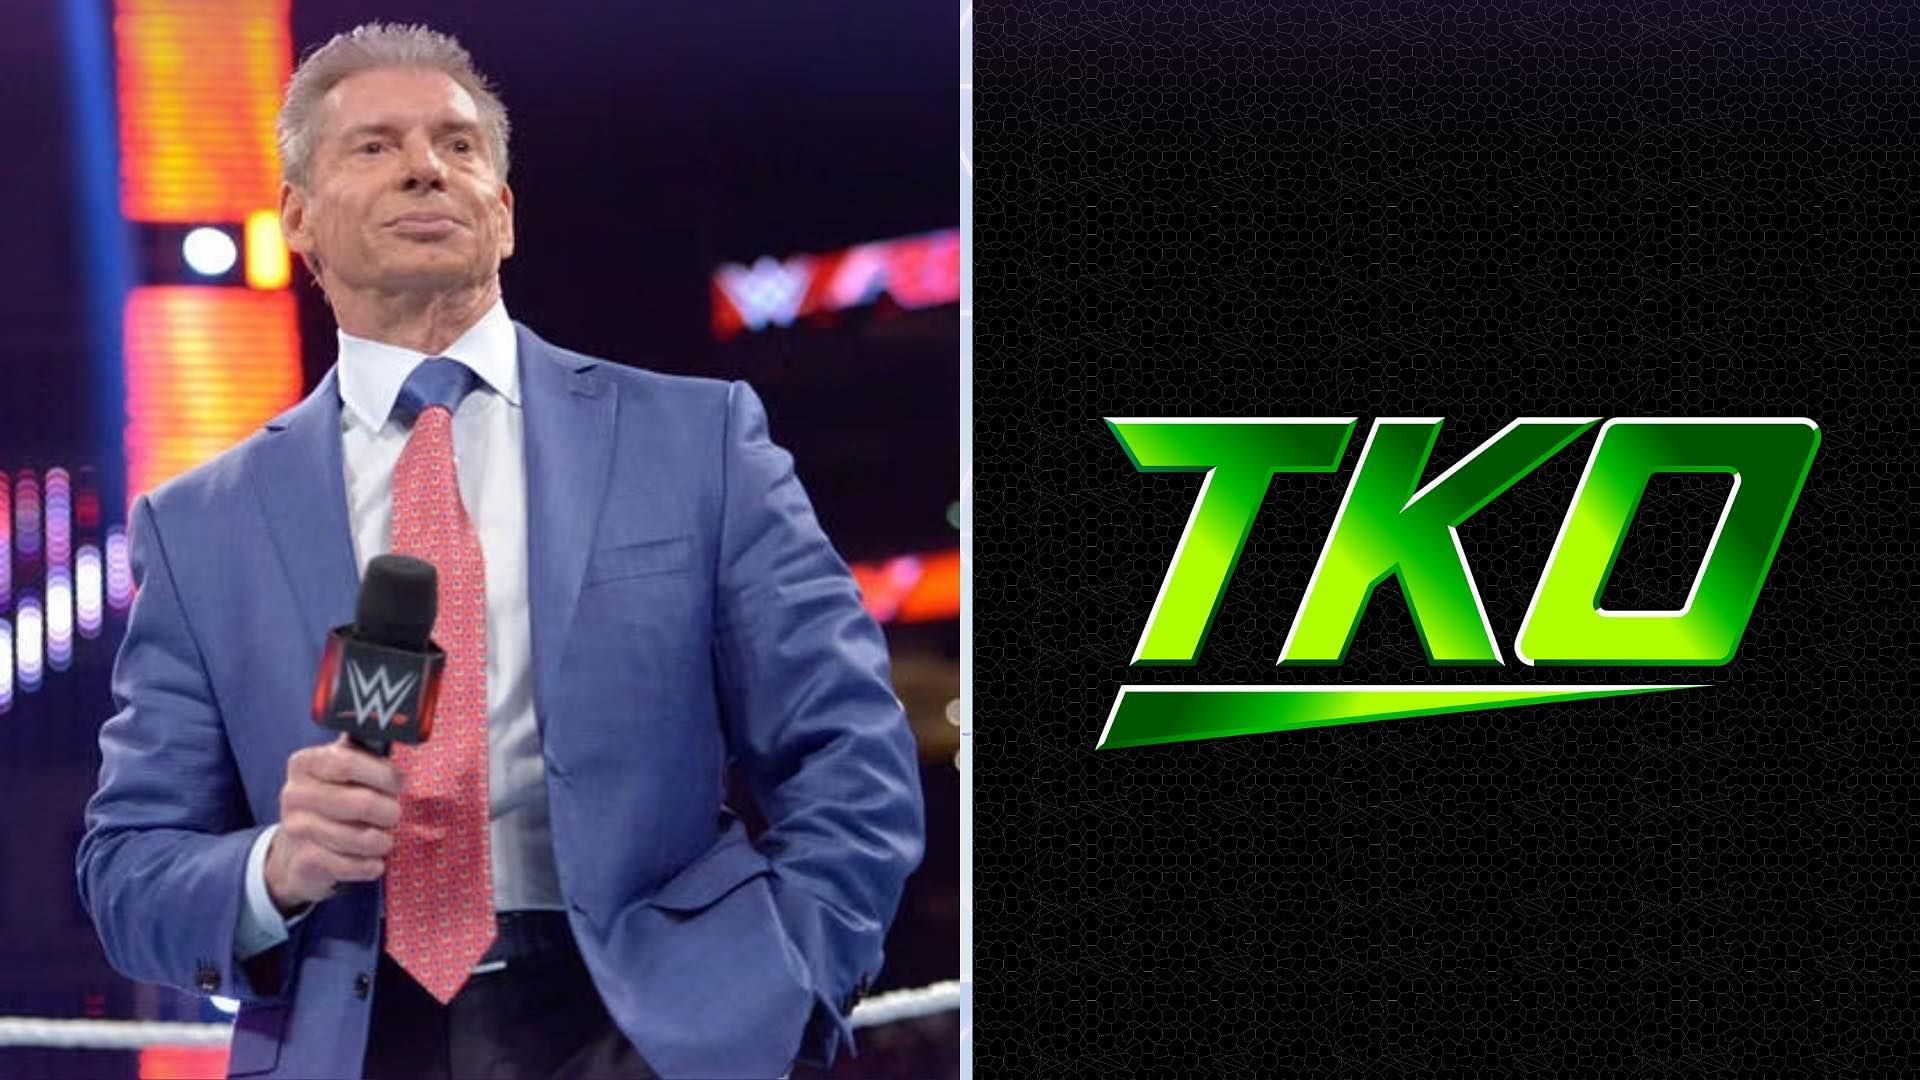 Will TKO take any further steps regarding the allegations against Vince McMahon?